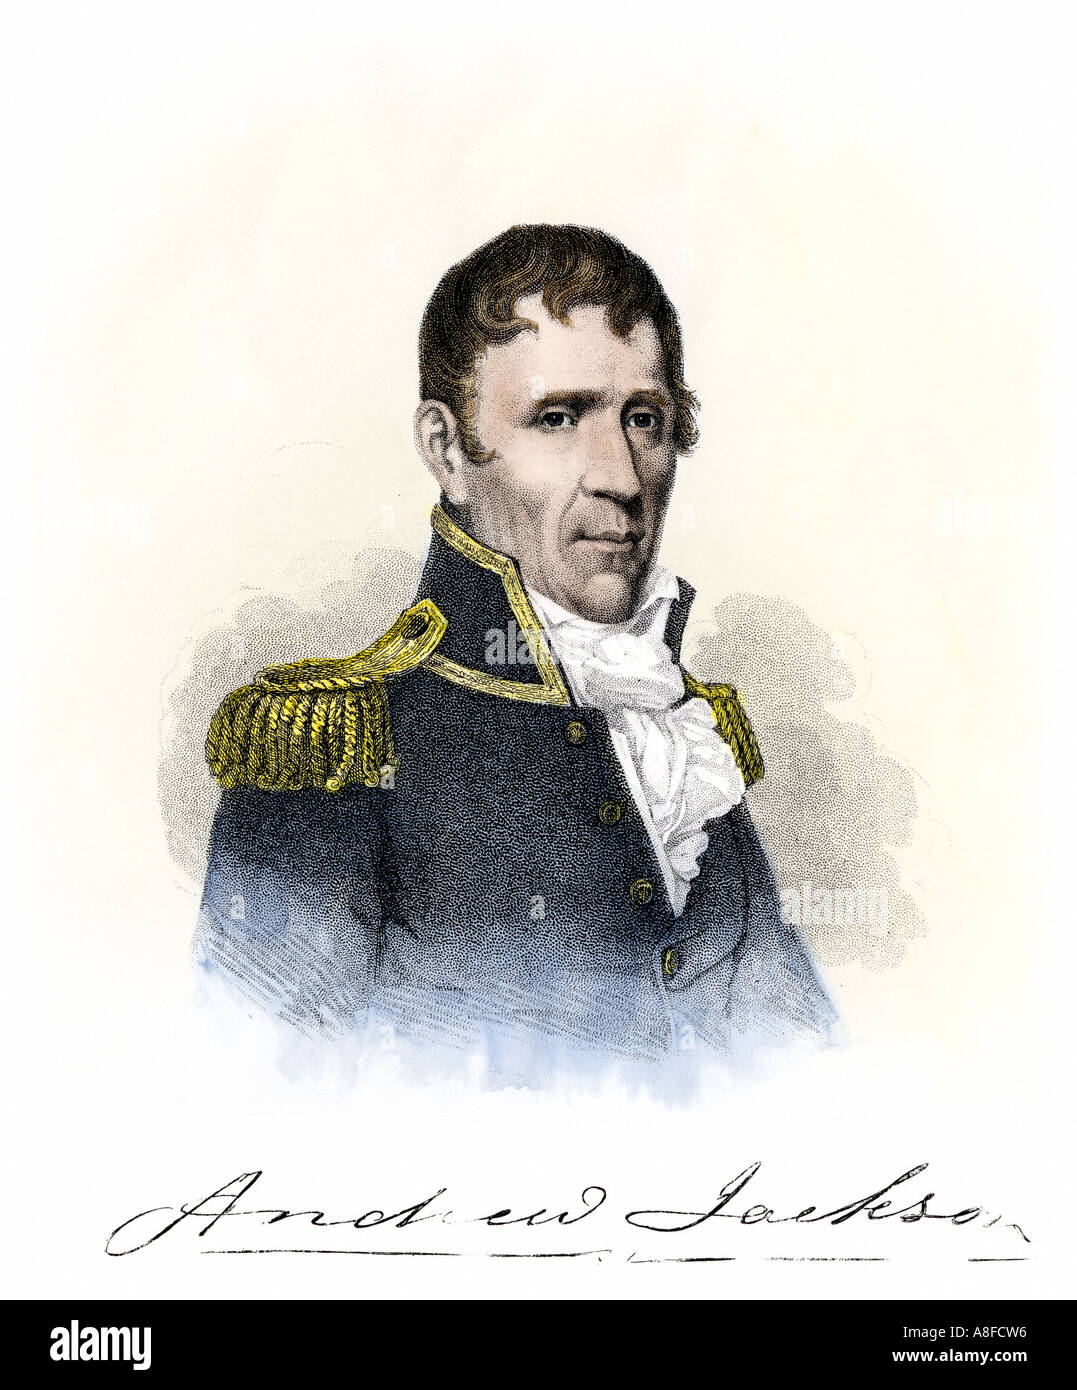 Andrew Jackson in US Army uniform about the time of the Battle of New Orleans 1815. Hand-colored steel engraving Stock Photo